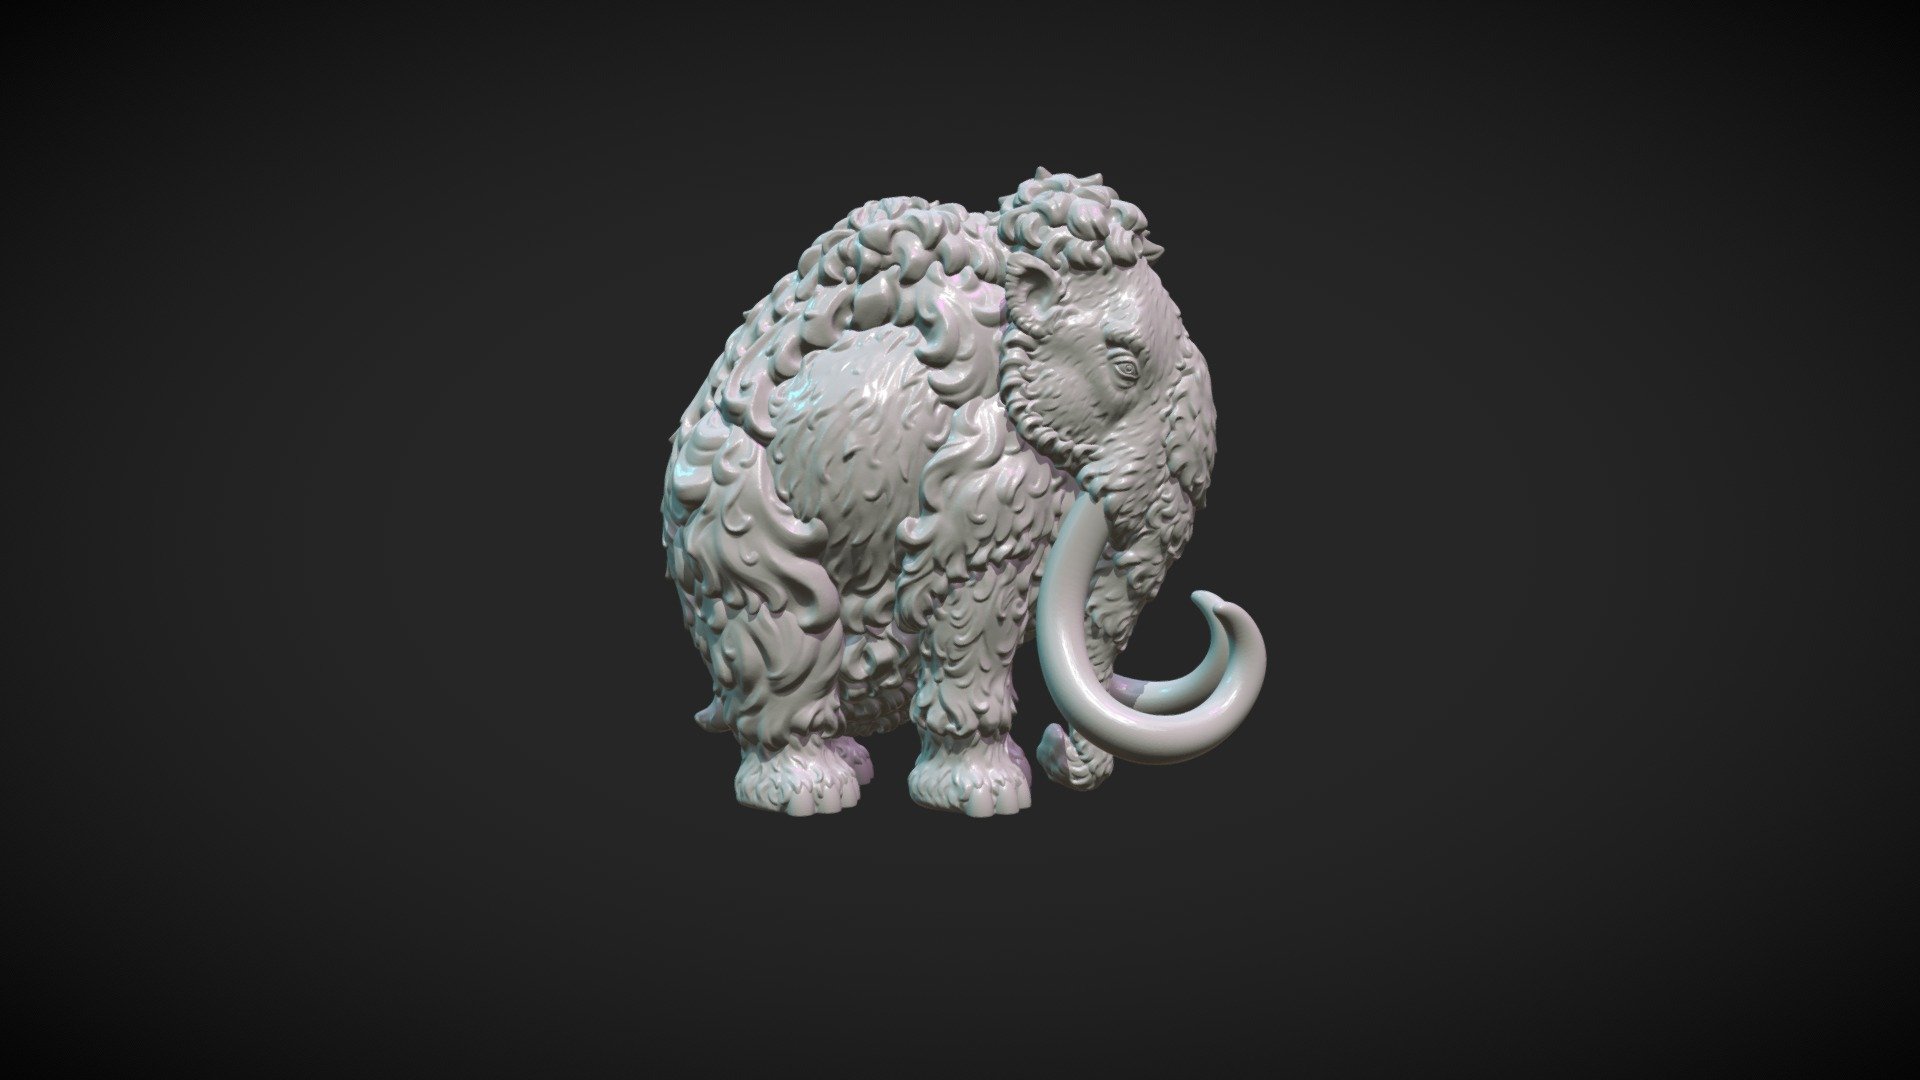 Print ready Mammoth figure in static pose.

Mesh is manifold. 
Measure units are millimeters, it is about 5 cm in height.

Faces count: 891010 (tris)

Here is solid and hollow versions of the mammoth. Wall thickness for hollow version is about 1 mm. Available formats: .blend, .obj, .stl, .fbx, .dae 

And here is version with tusks as separate object, that can be printed or carved separately. Three files of this version are available:

1) Tusks.stl 
2) Mammoth-Solid_withoutTusks.stl 
3) Mammoth-Hollow_withoutTusks.stl

And here is .blend files that contains hollow and solid versions with separate tusks.

======================================================== 

Cycles materials that was used for rendering is available in Mammoth-Solid.blend file 3d model